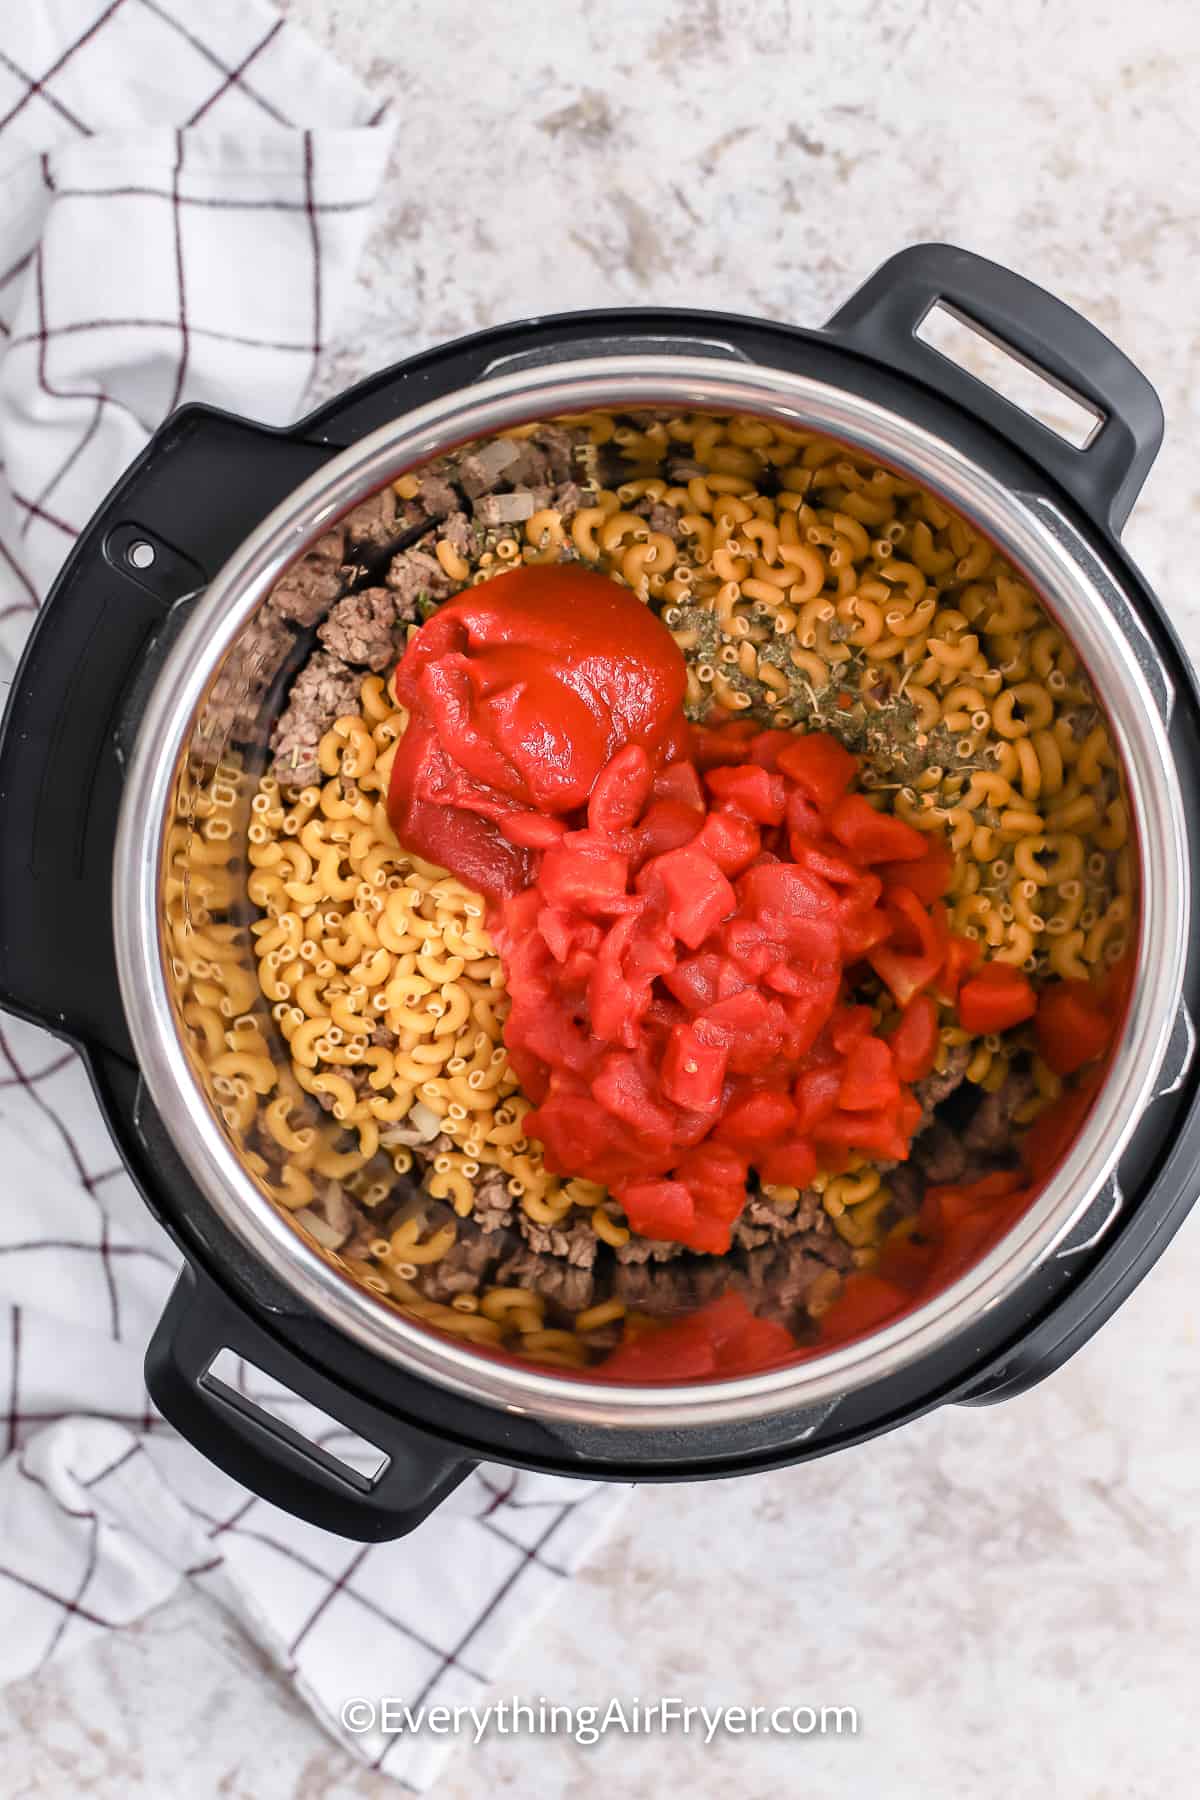 Goulash ingredients in an Instant Pot